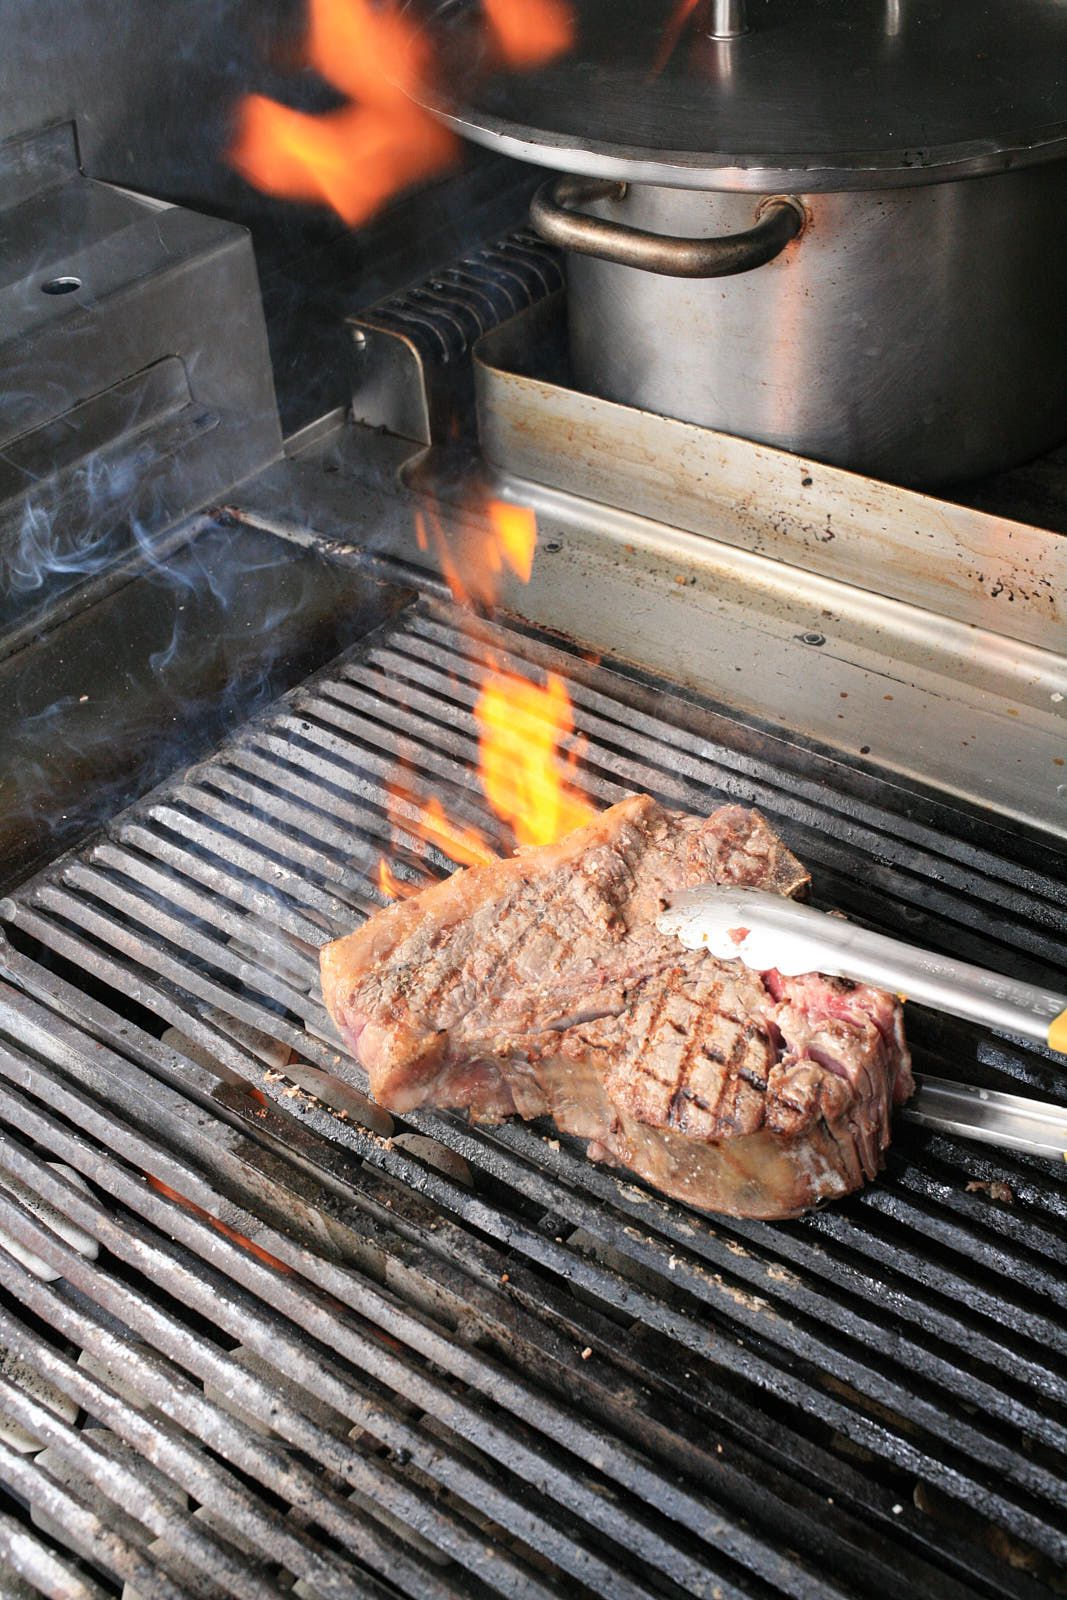 A beef steak on grill bars, flames licking it from below.